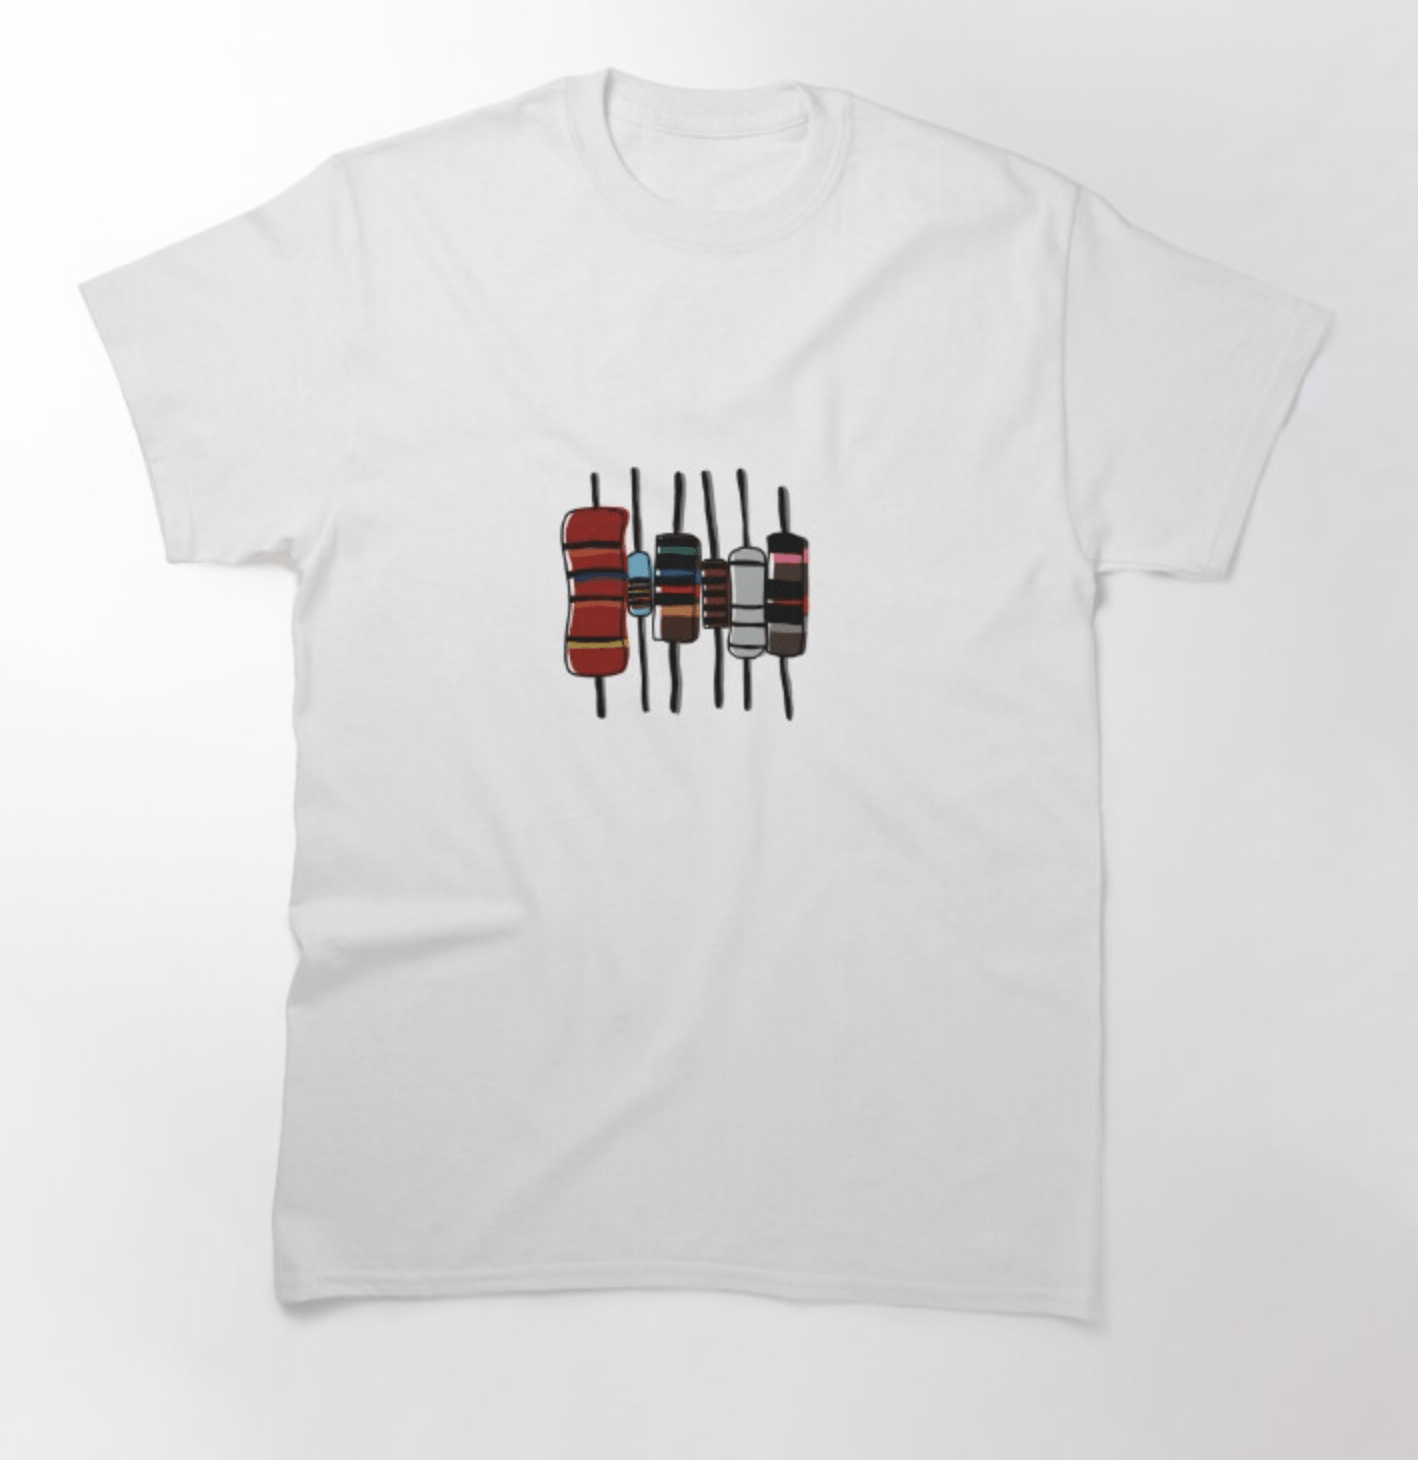 Links to a Red Bubble post for a resistor t-shirt